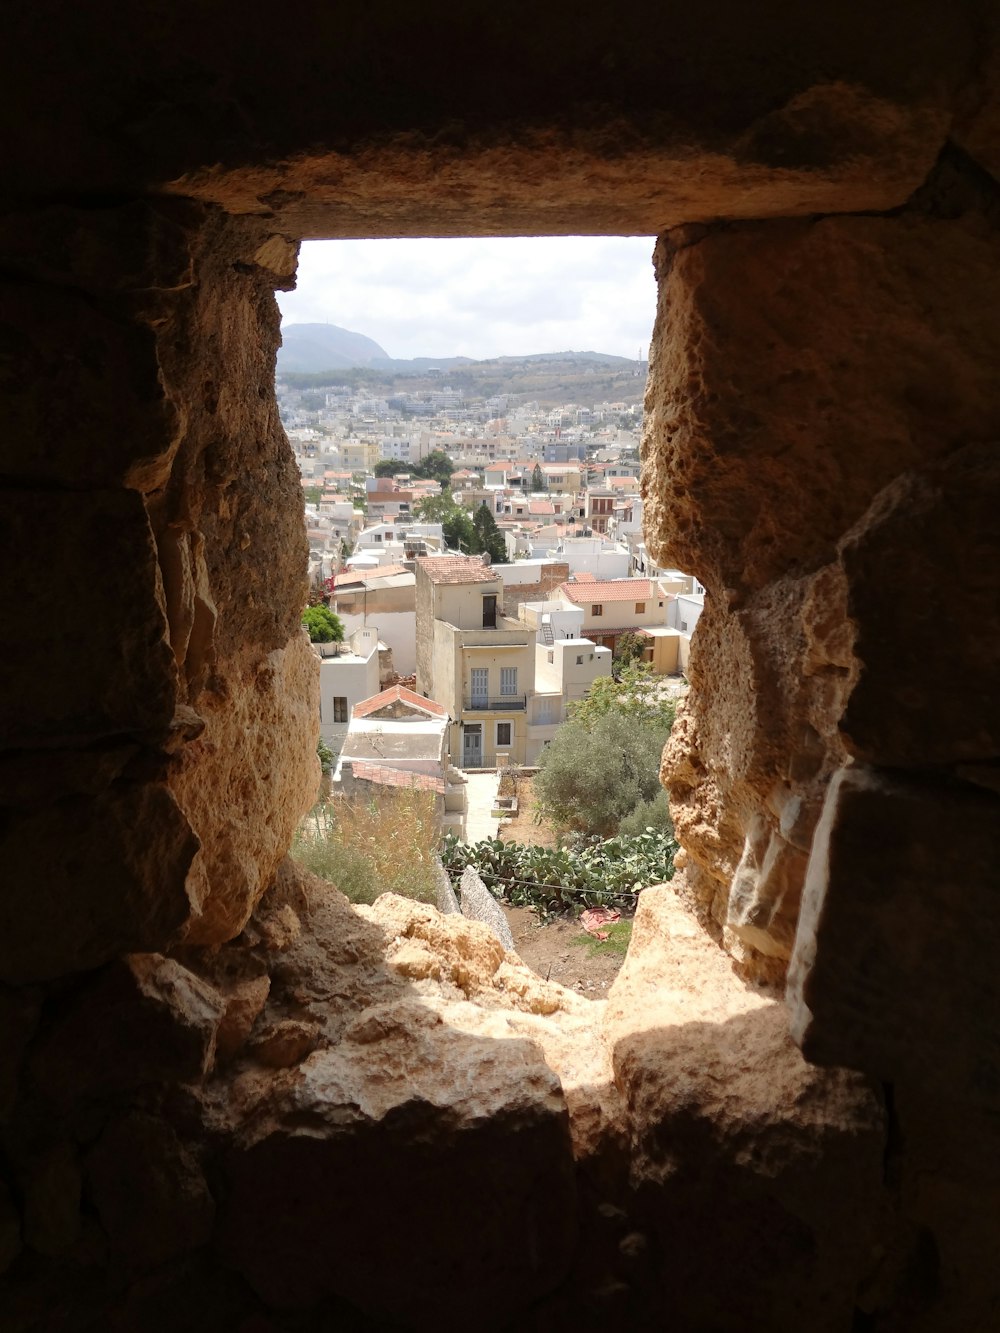 a view of a town from a window in a stone building